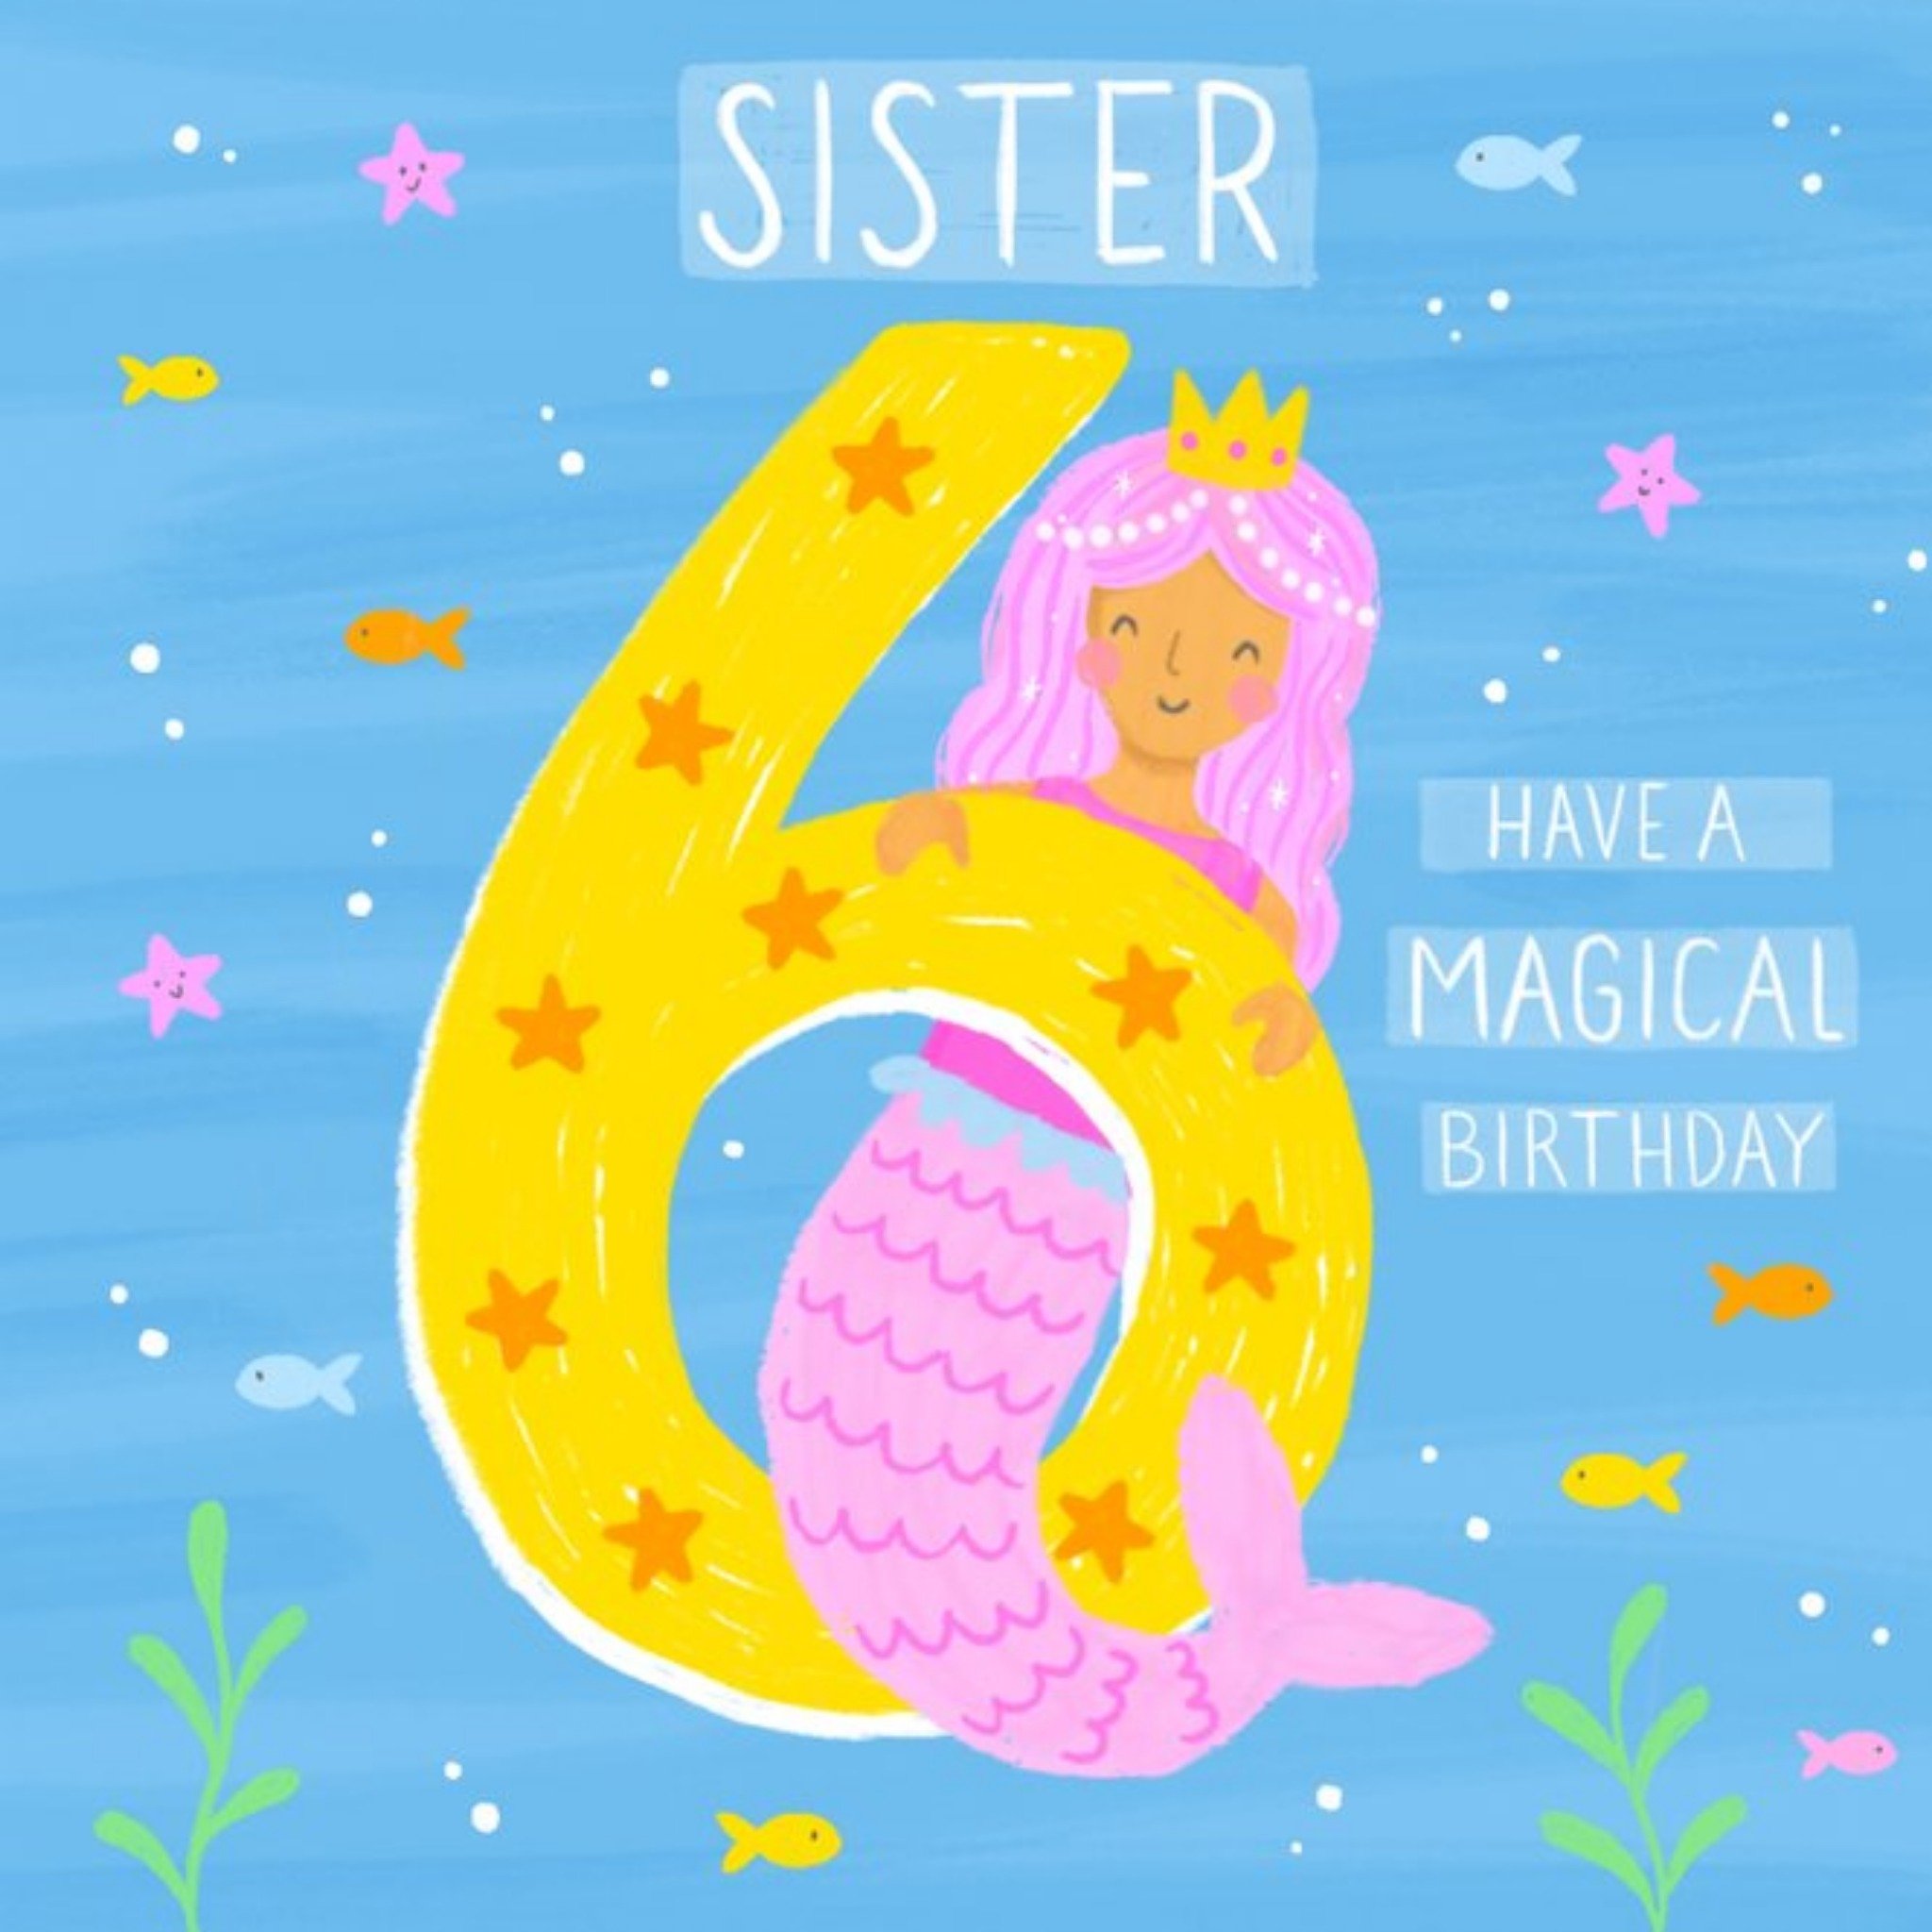 Moonpig Cute Illustrated Mermaid 6 Today Magical Sister Birthday Card, Square